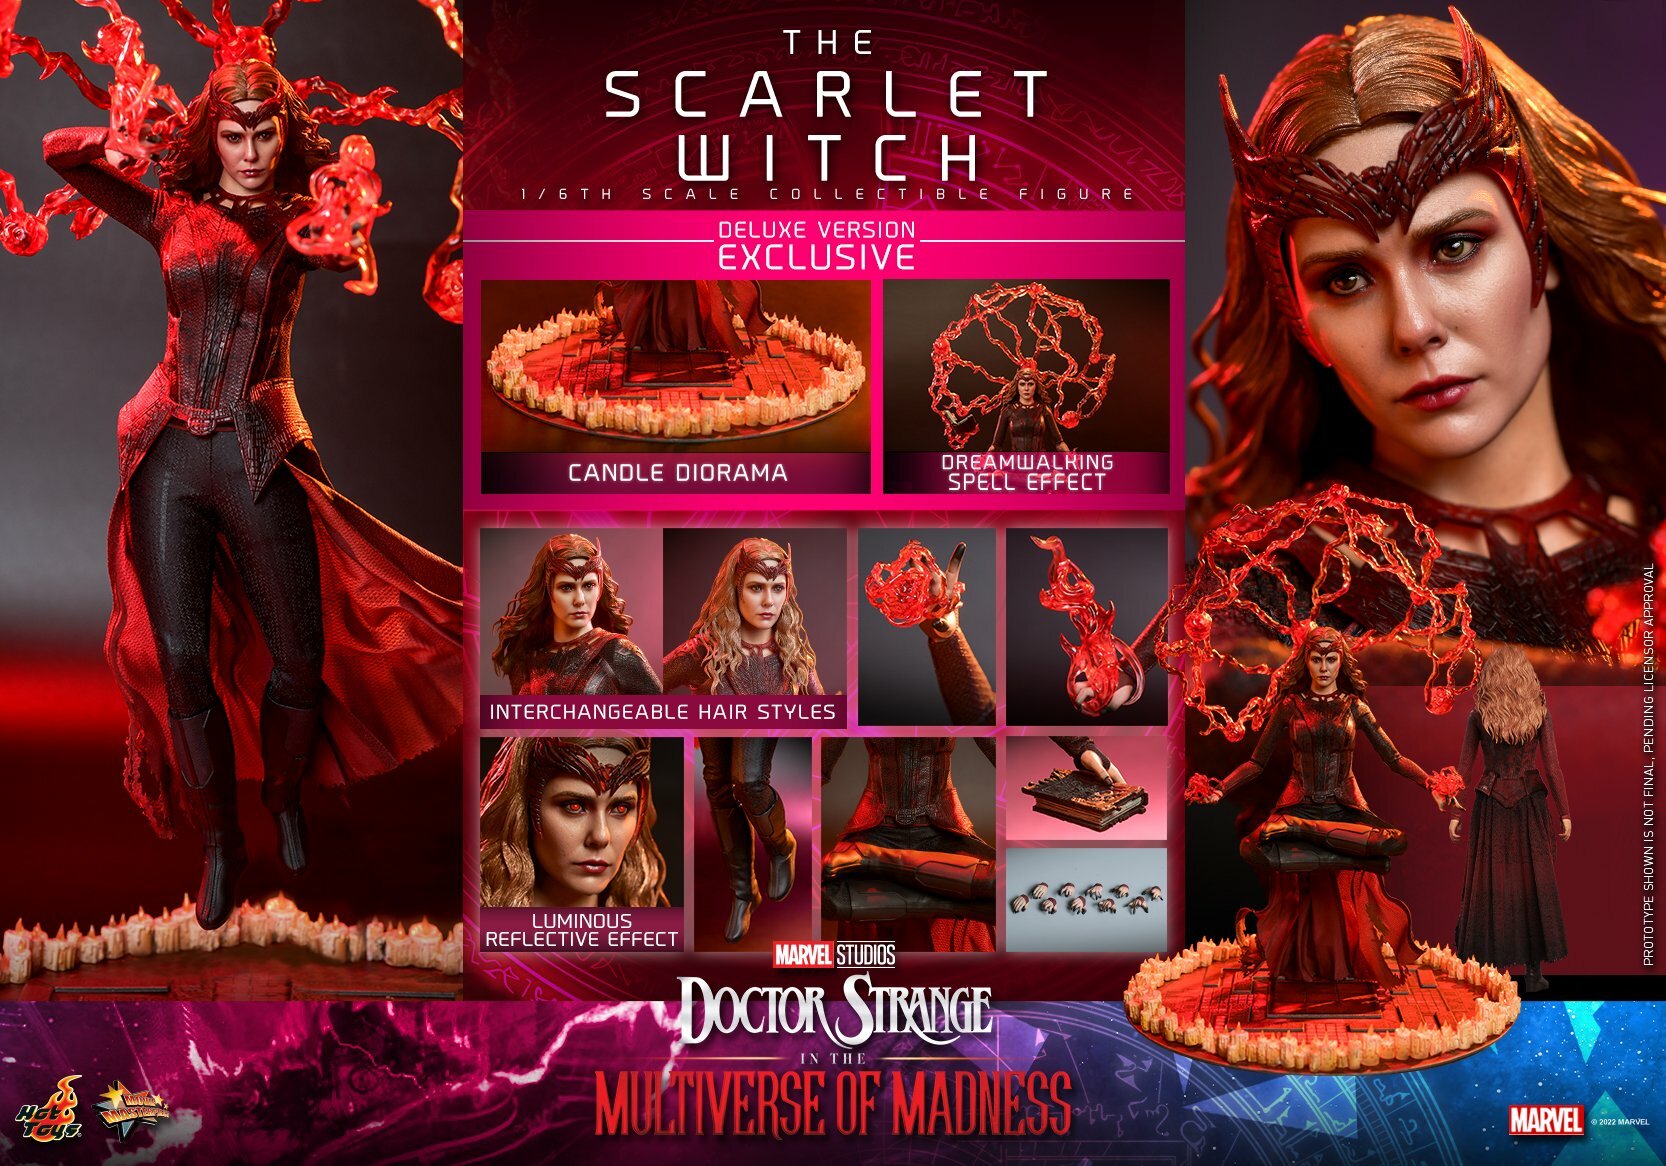 Hot-Toy-Multiverse-of-Madness-Scarlet-Witch-DX-016.jpg.49542cf389be26b0cac0762fe1447b04.jpg